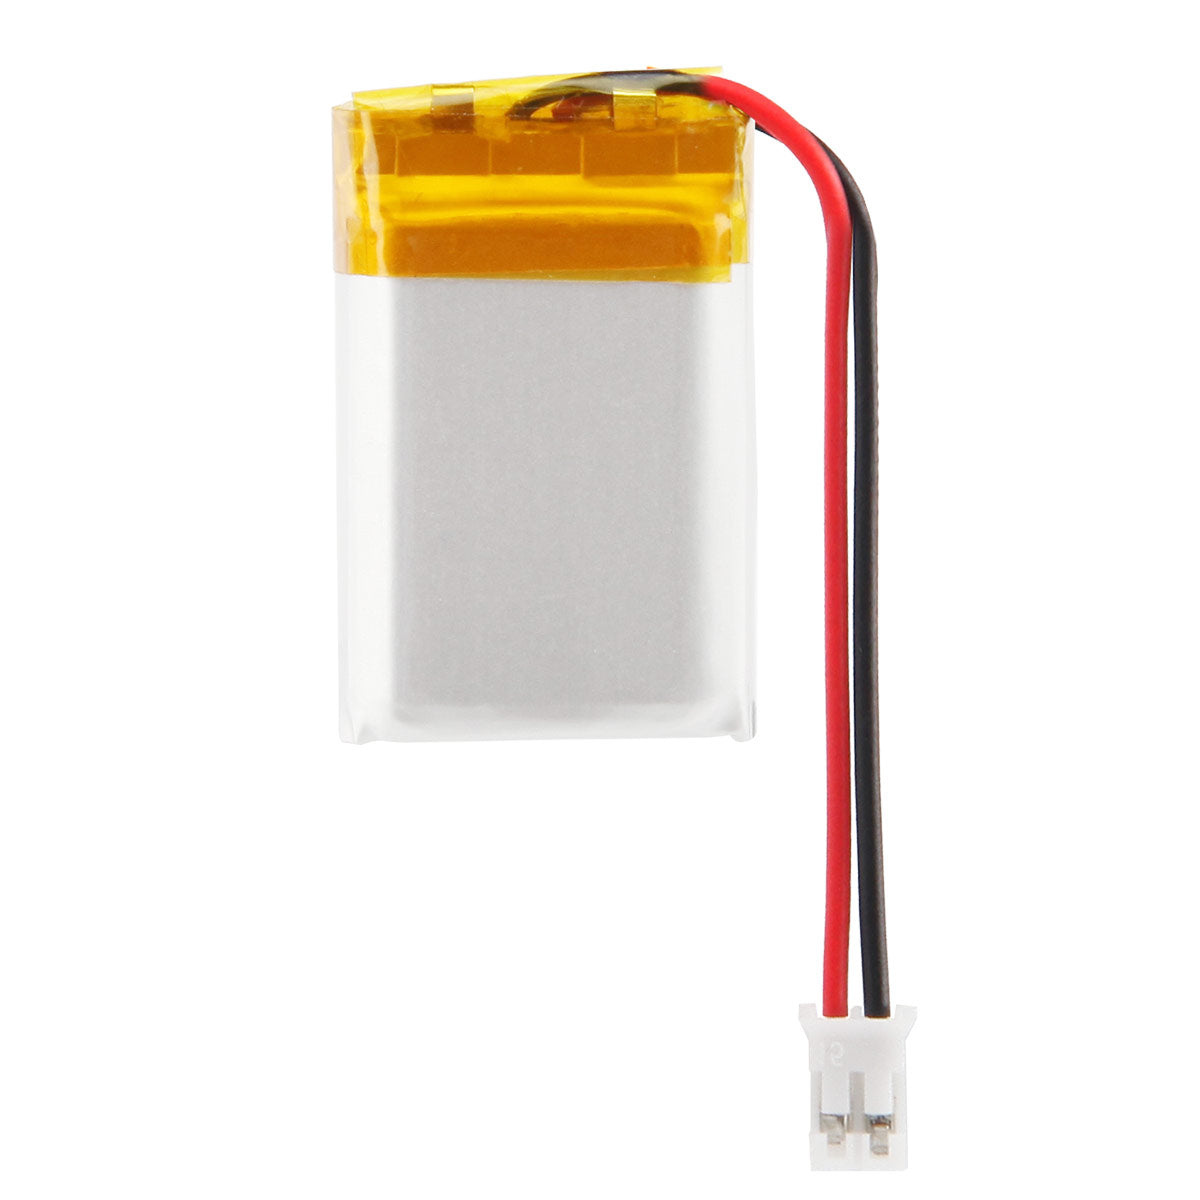 YDL 3.7V 300mAh 602030 Rechargeable Lipo battery with JST Connector - YDL Battery